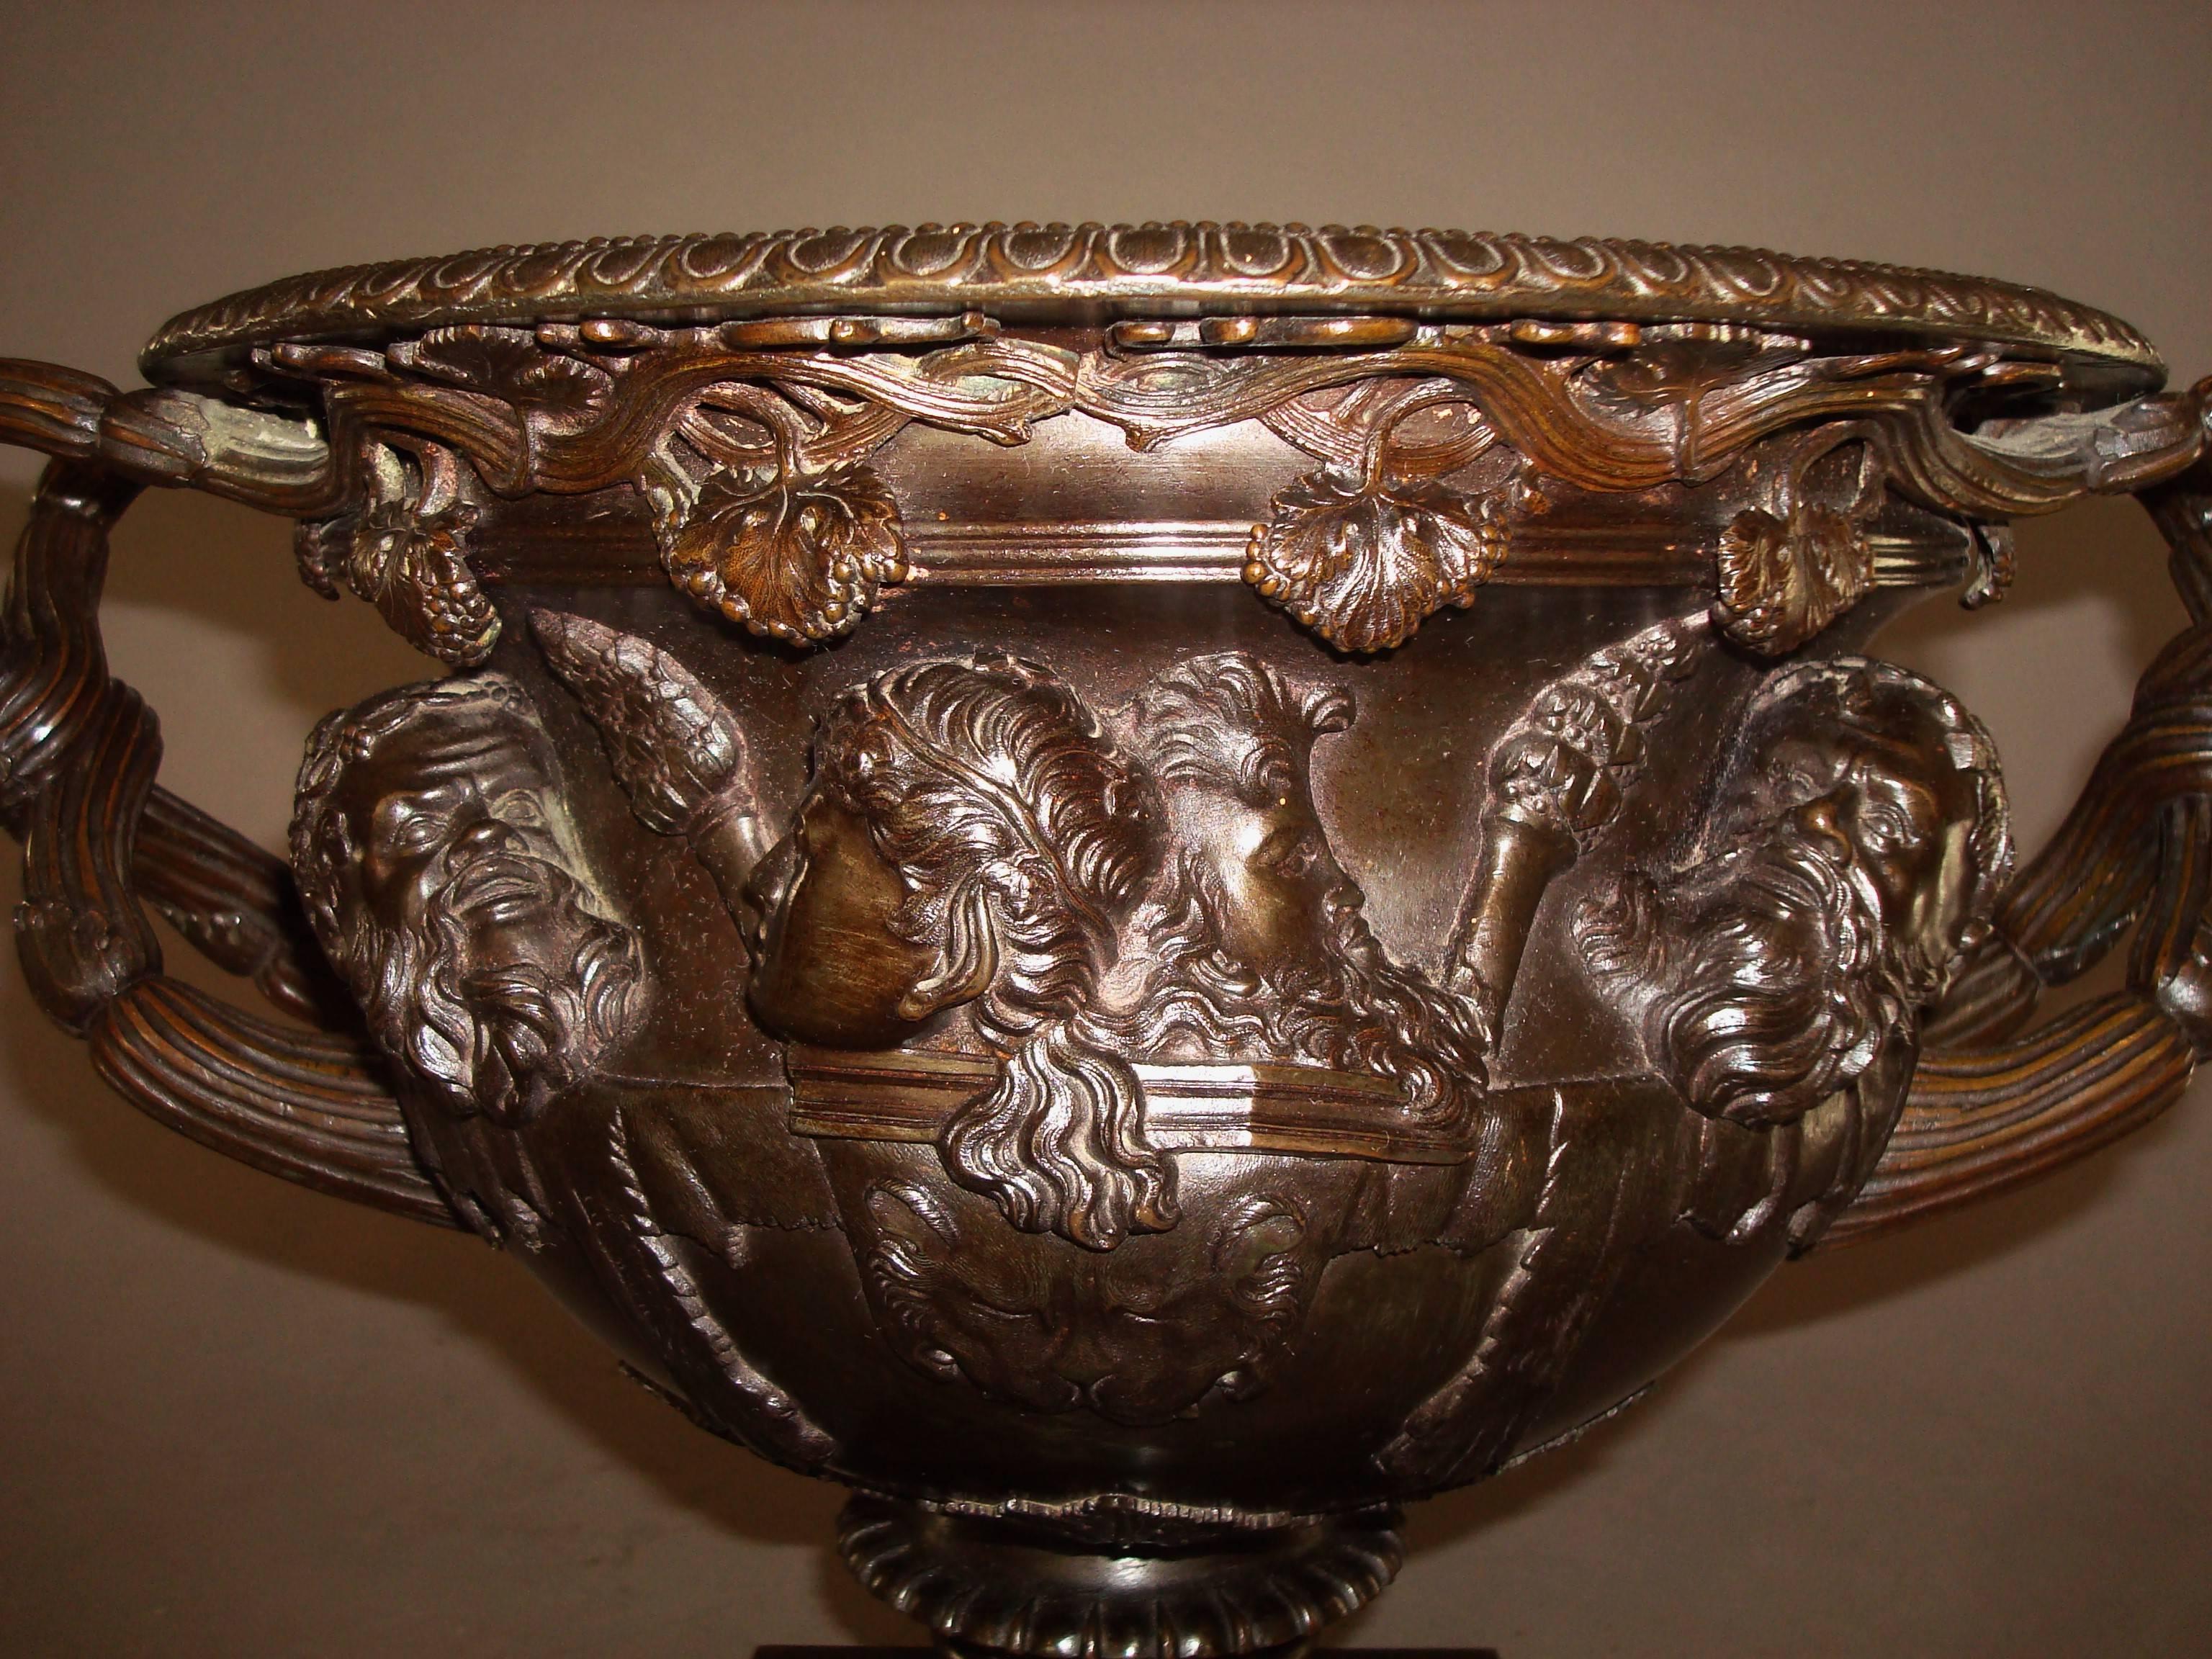 Good 19th century Grand Tour bronze warwick vase, of large proportions; the rim with an egg and dart border above trailing vine leaves and the classical masks below cast in high relief; the handles to either side being entwined vine branches, with